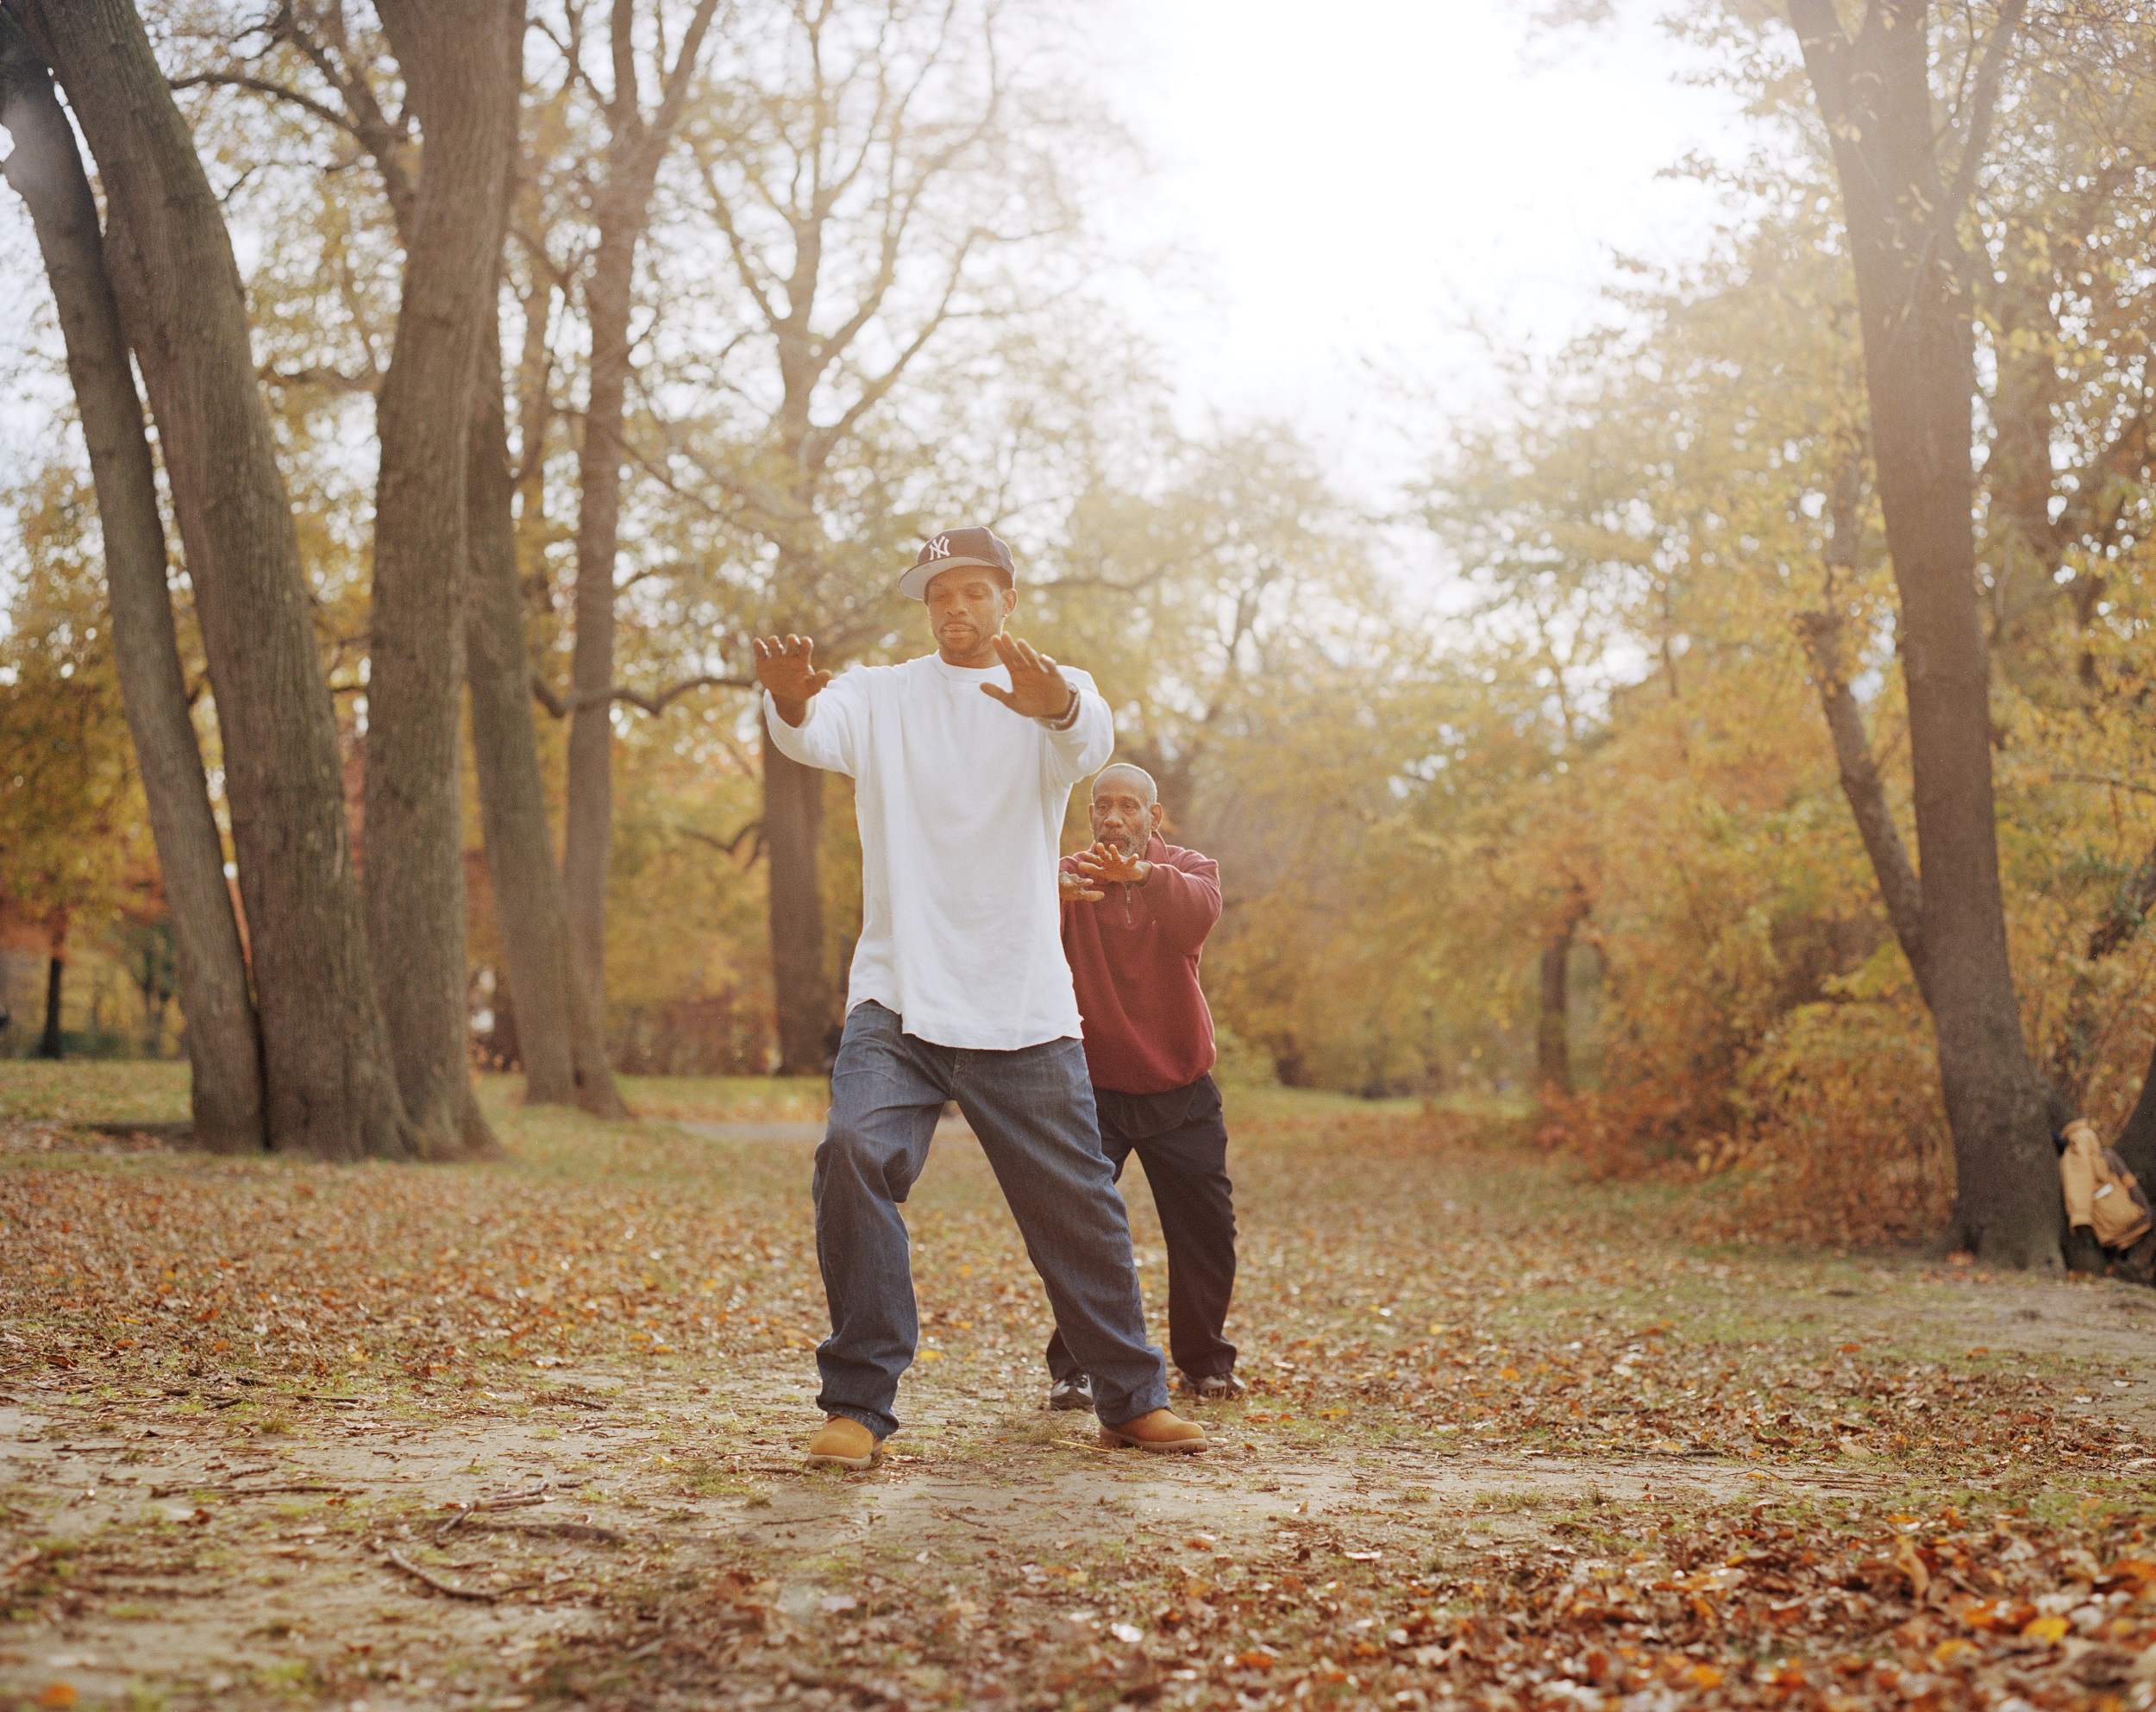 Color photograph of two men practicing T'ai Chi in a wooded, autumnal landscape